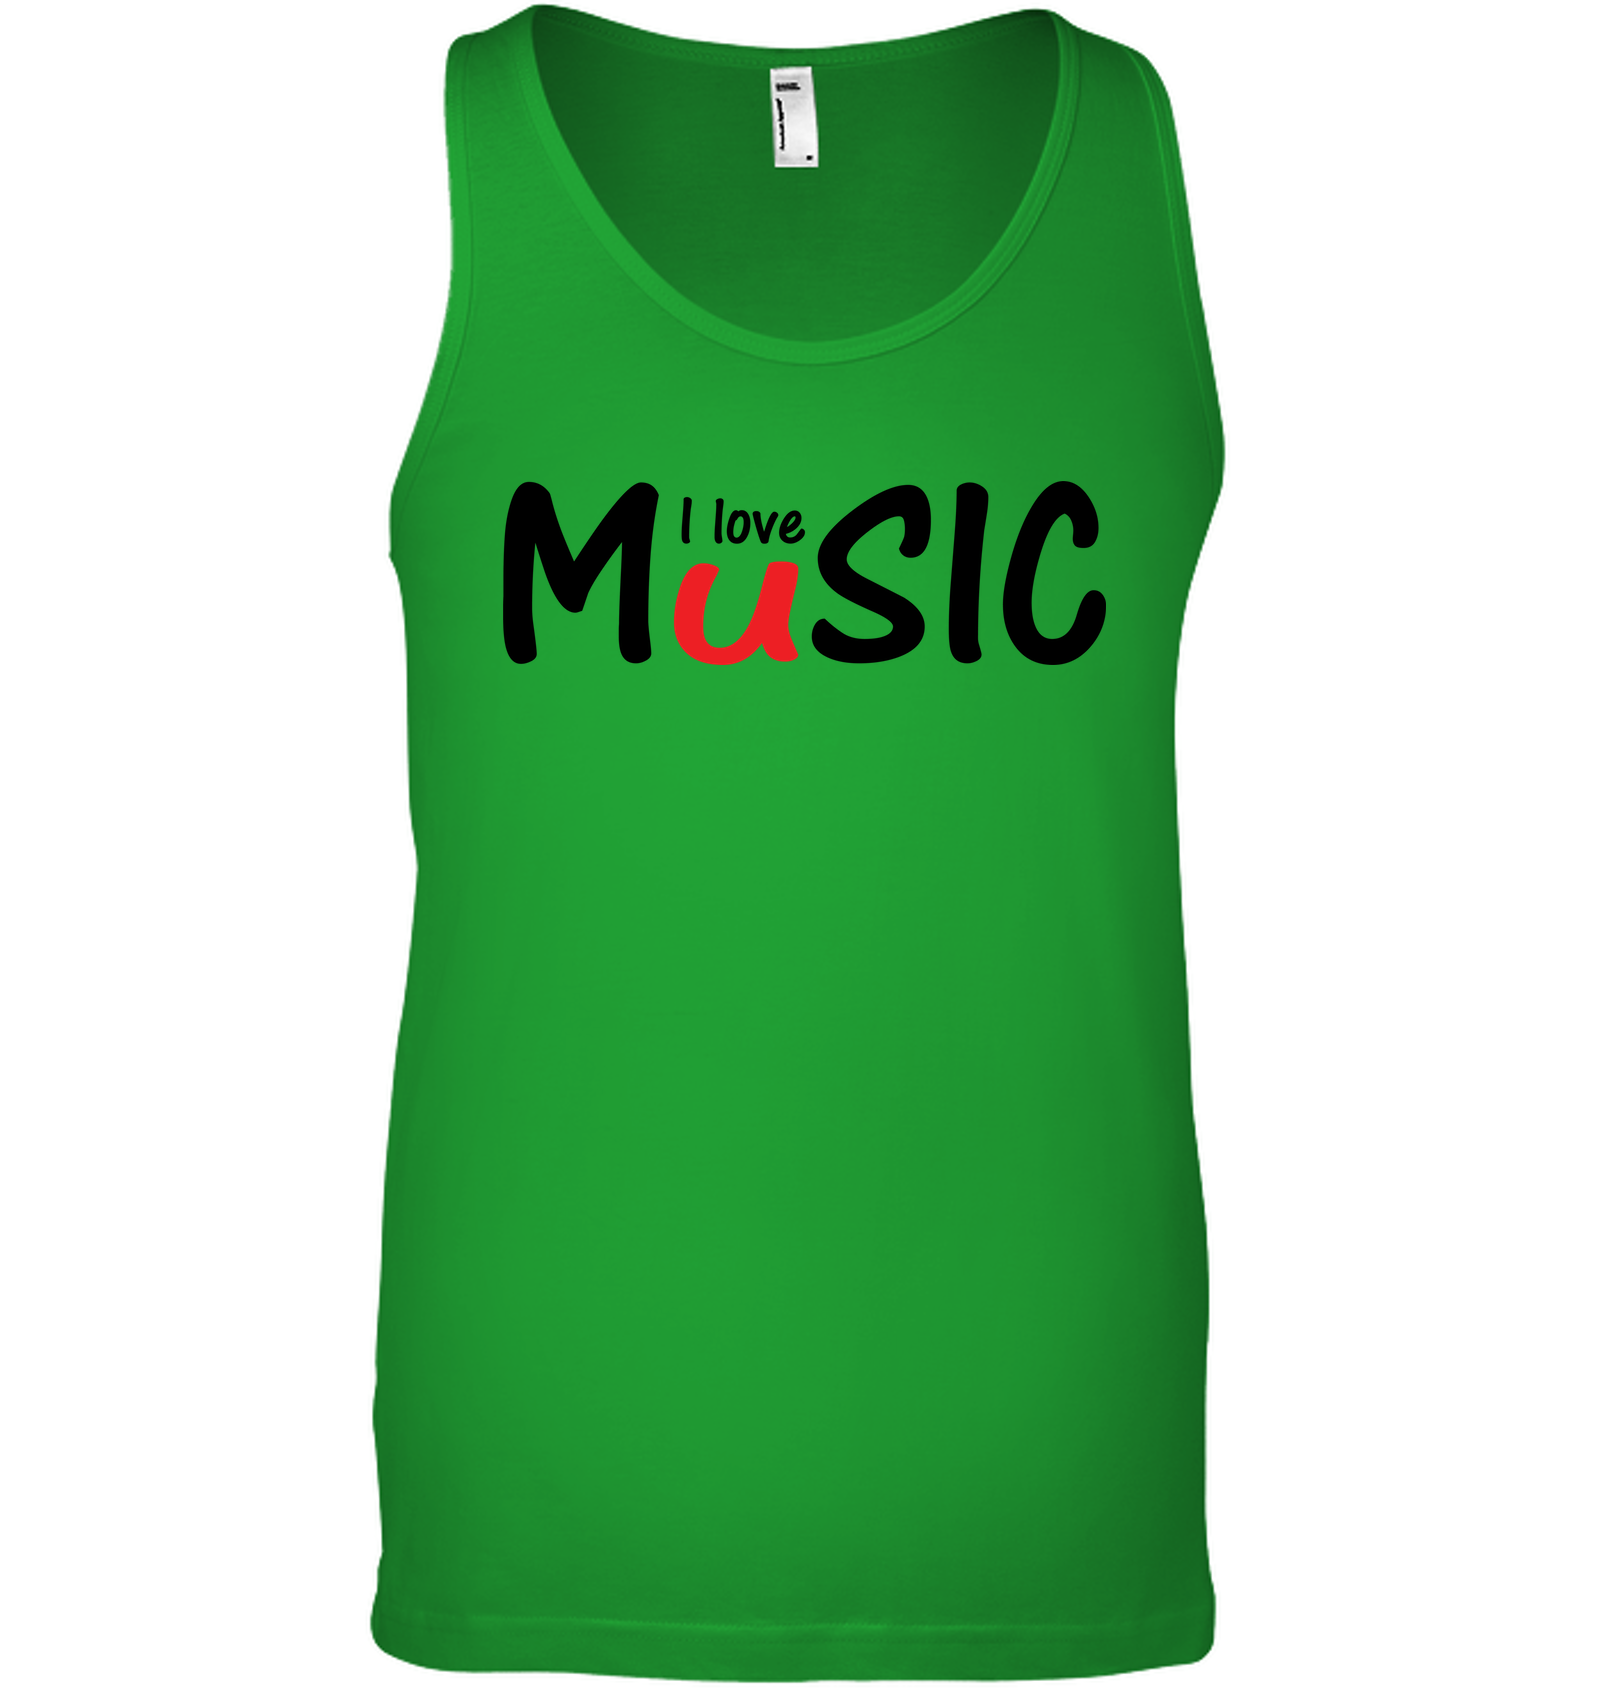 I Love Music plain and simple - Bella + Canvas Unisex Jersey Tank